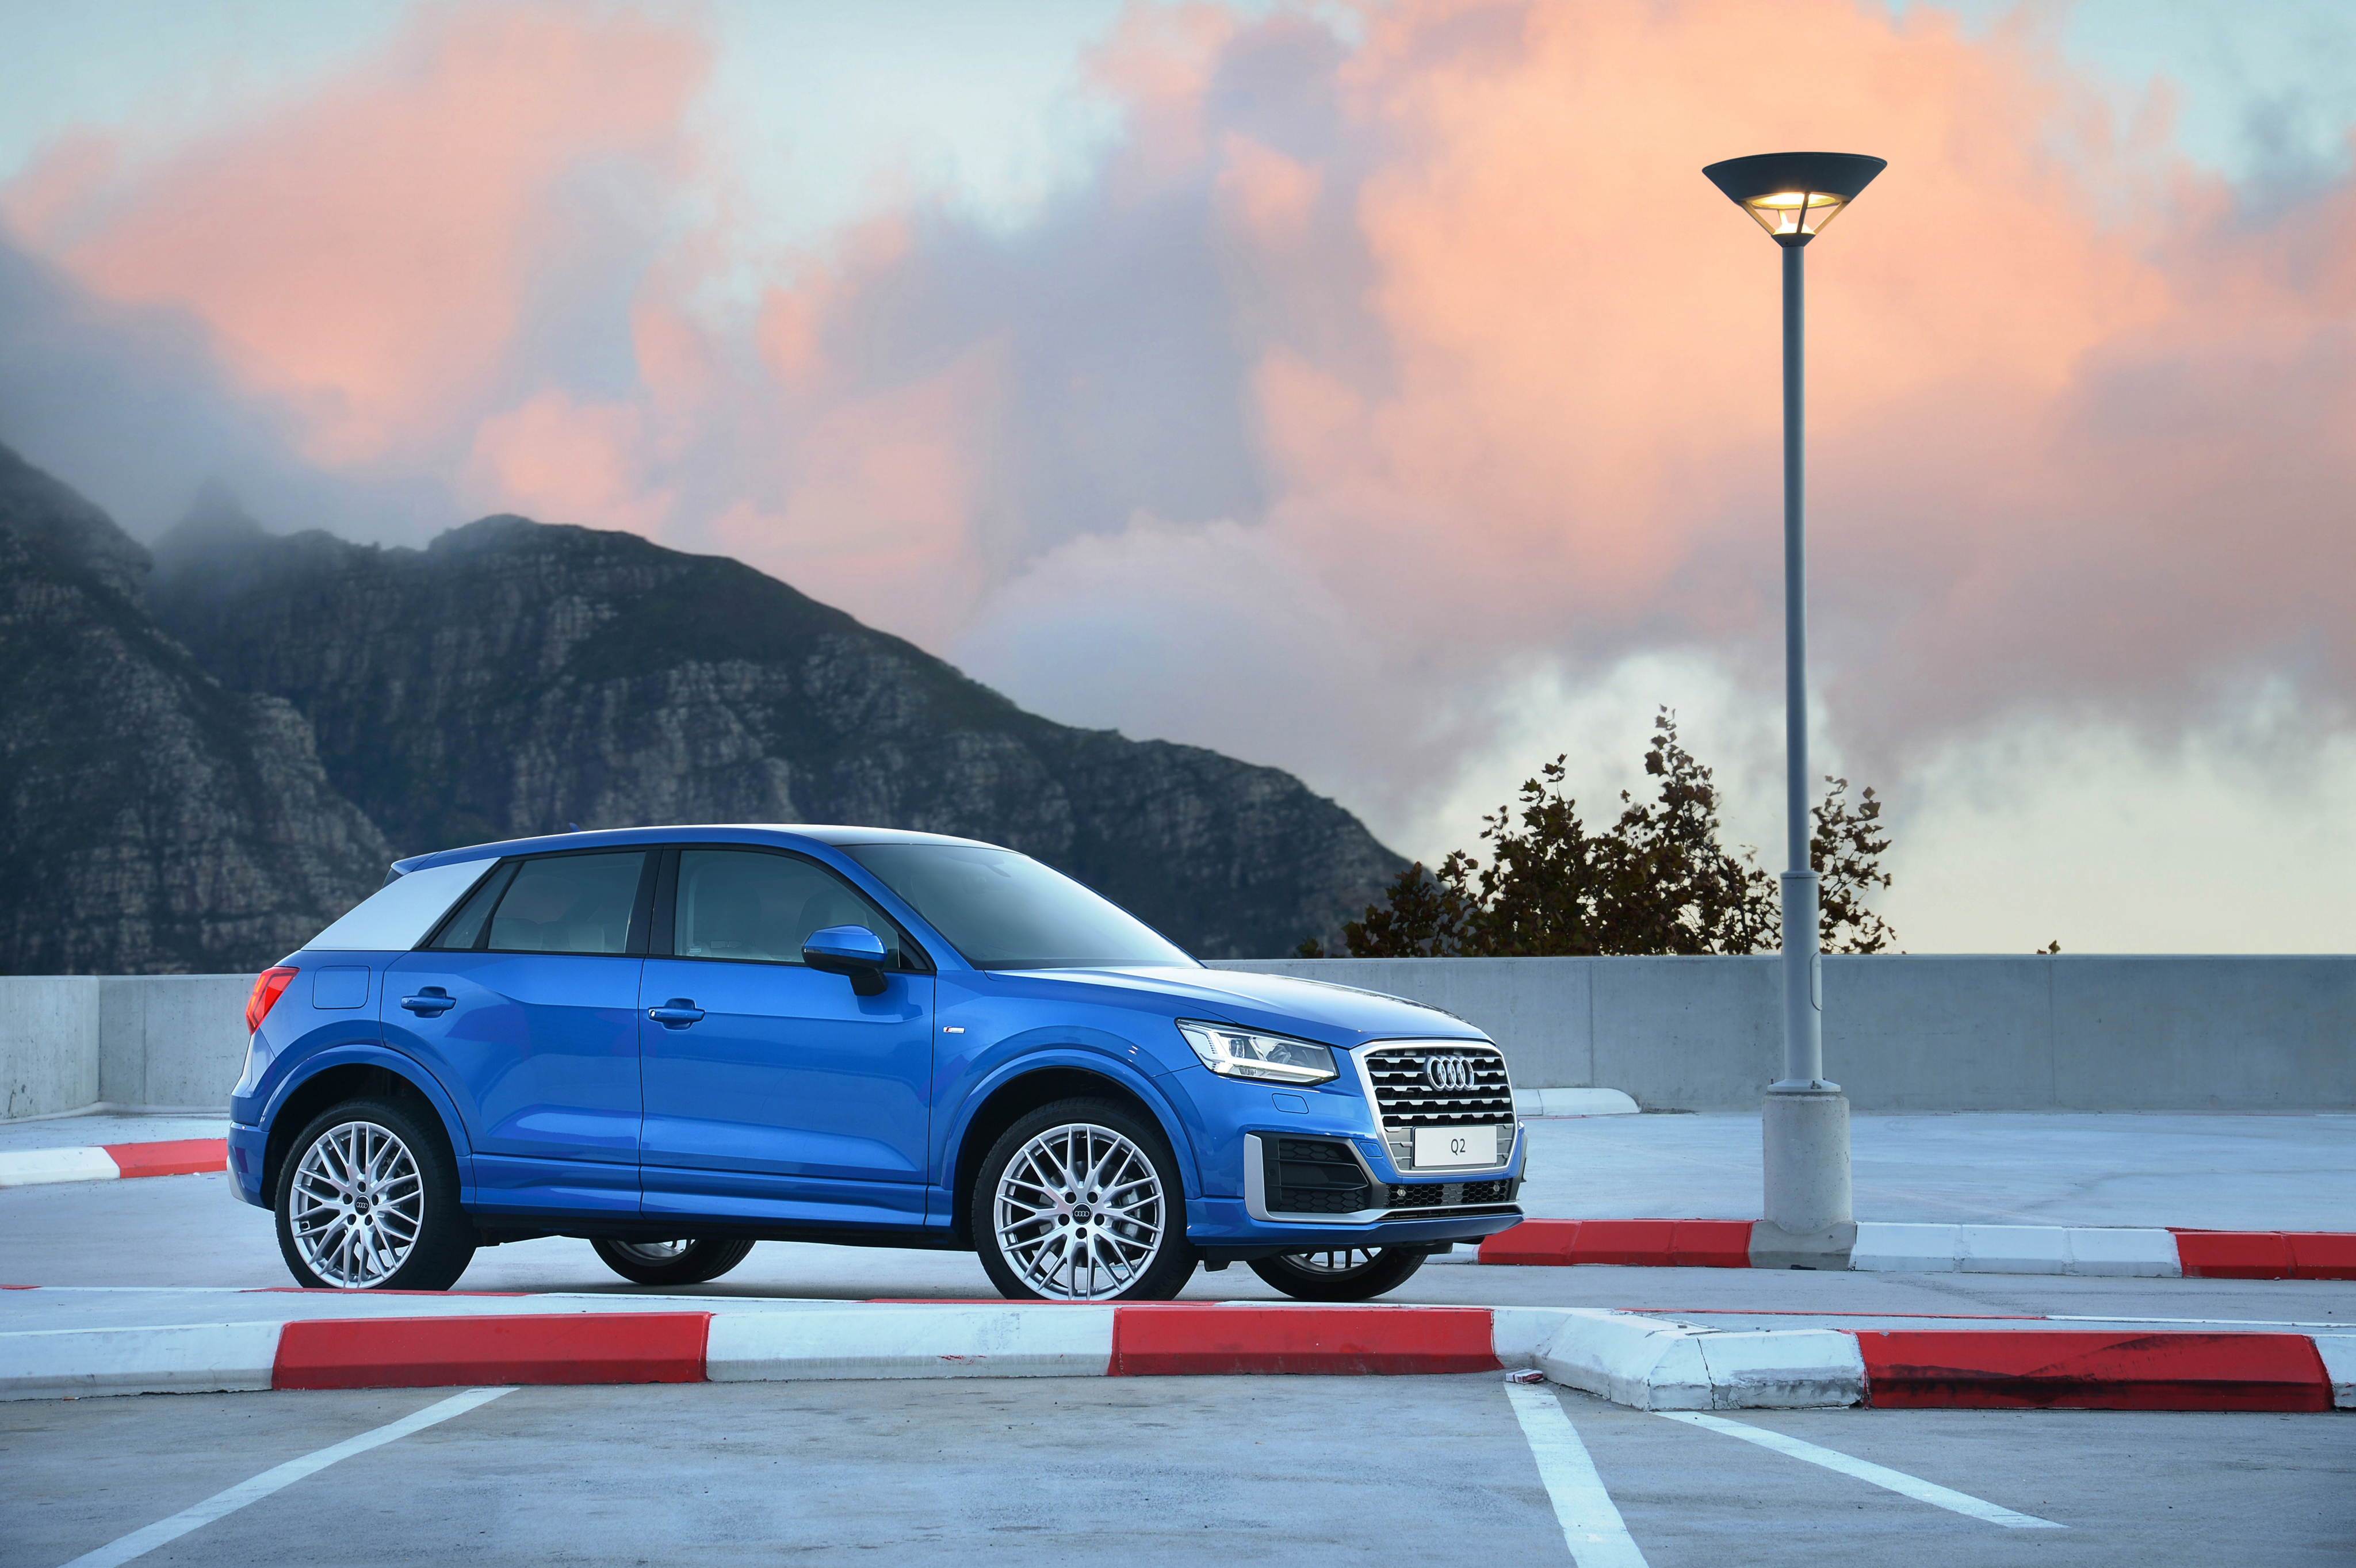 Audi Q2 Edition 1 Wallpapers